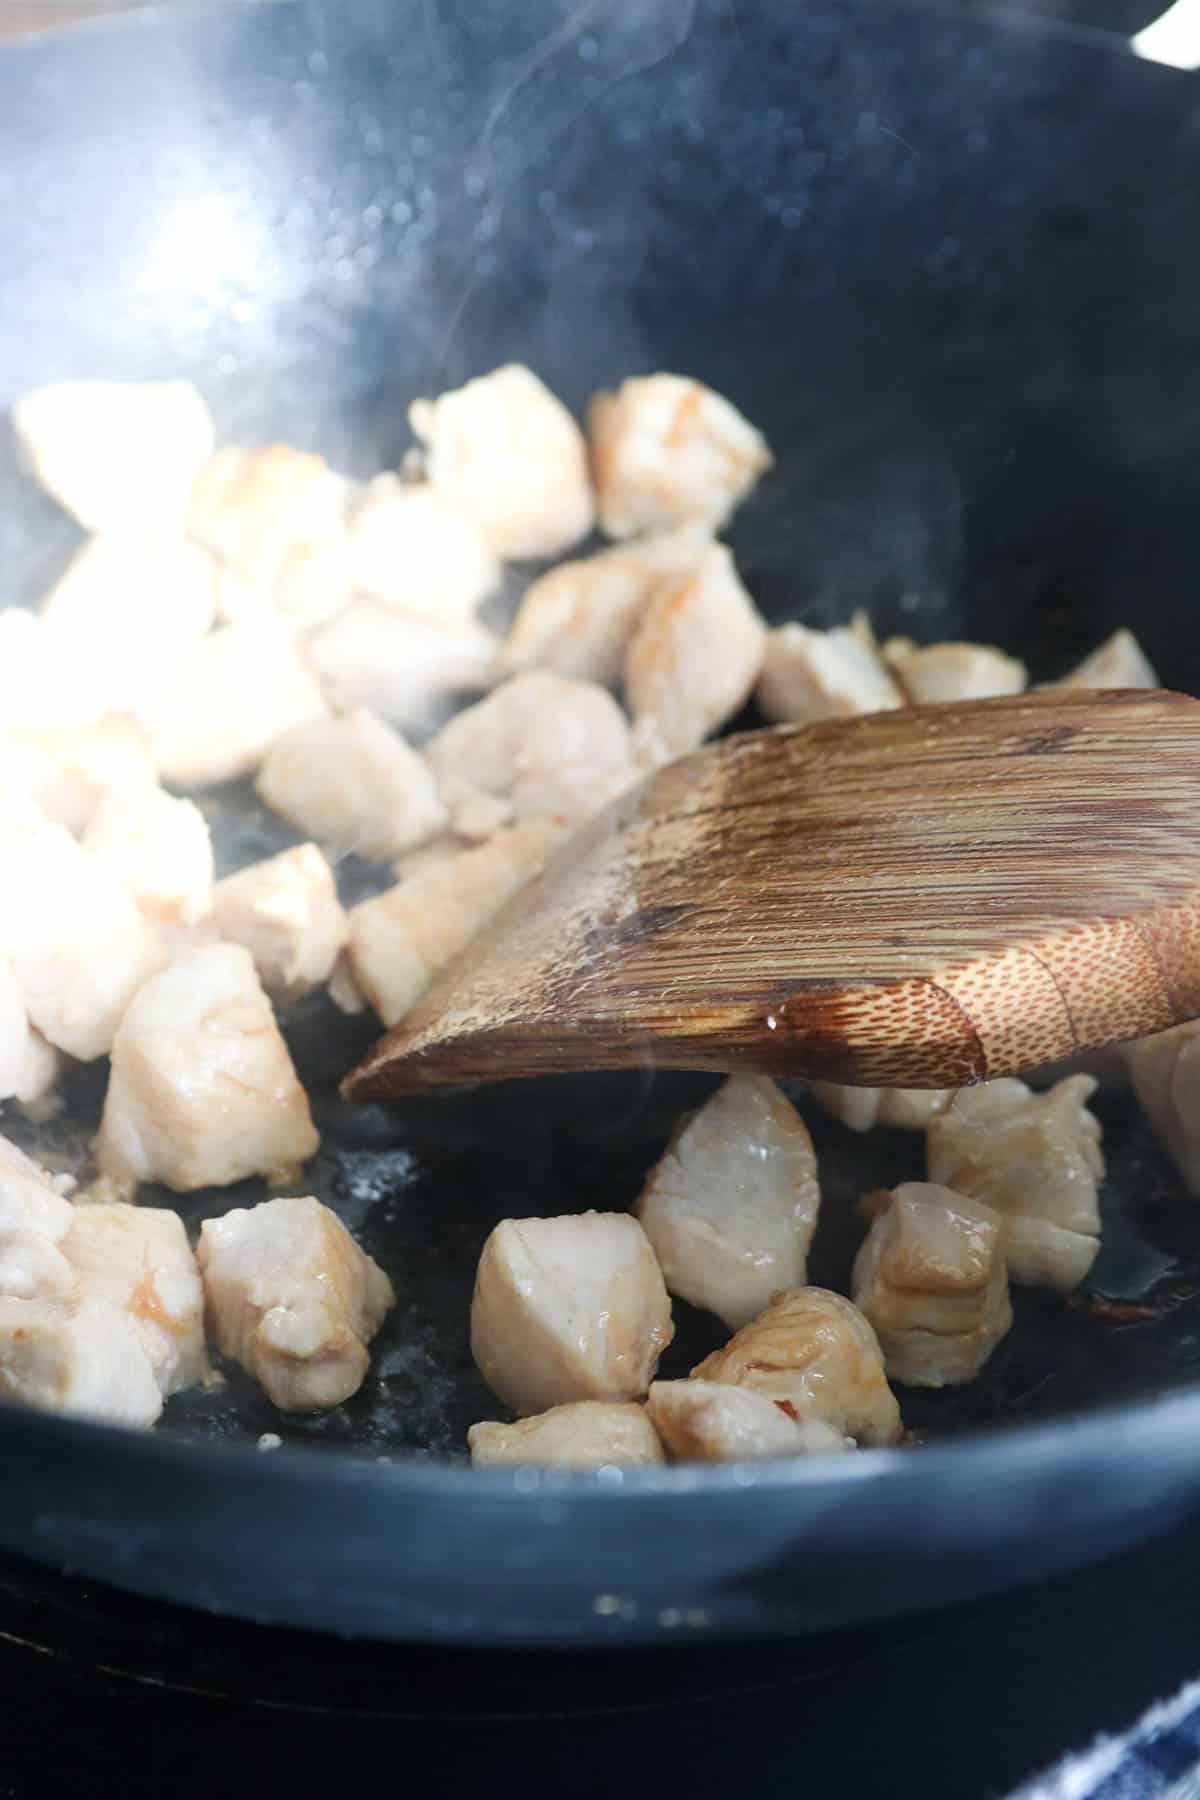 Cooking the chicken pieces in a wok.